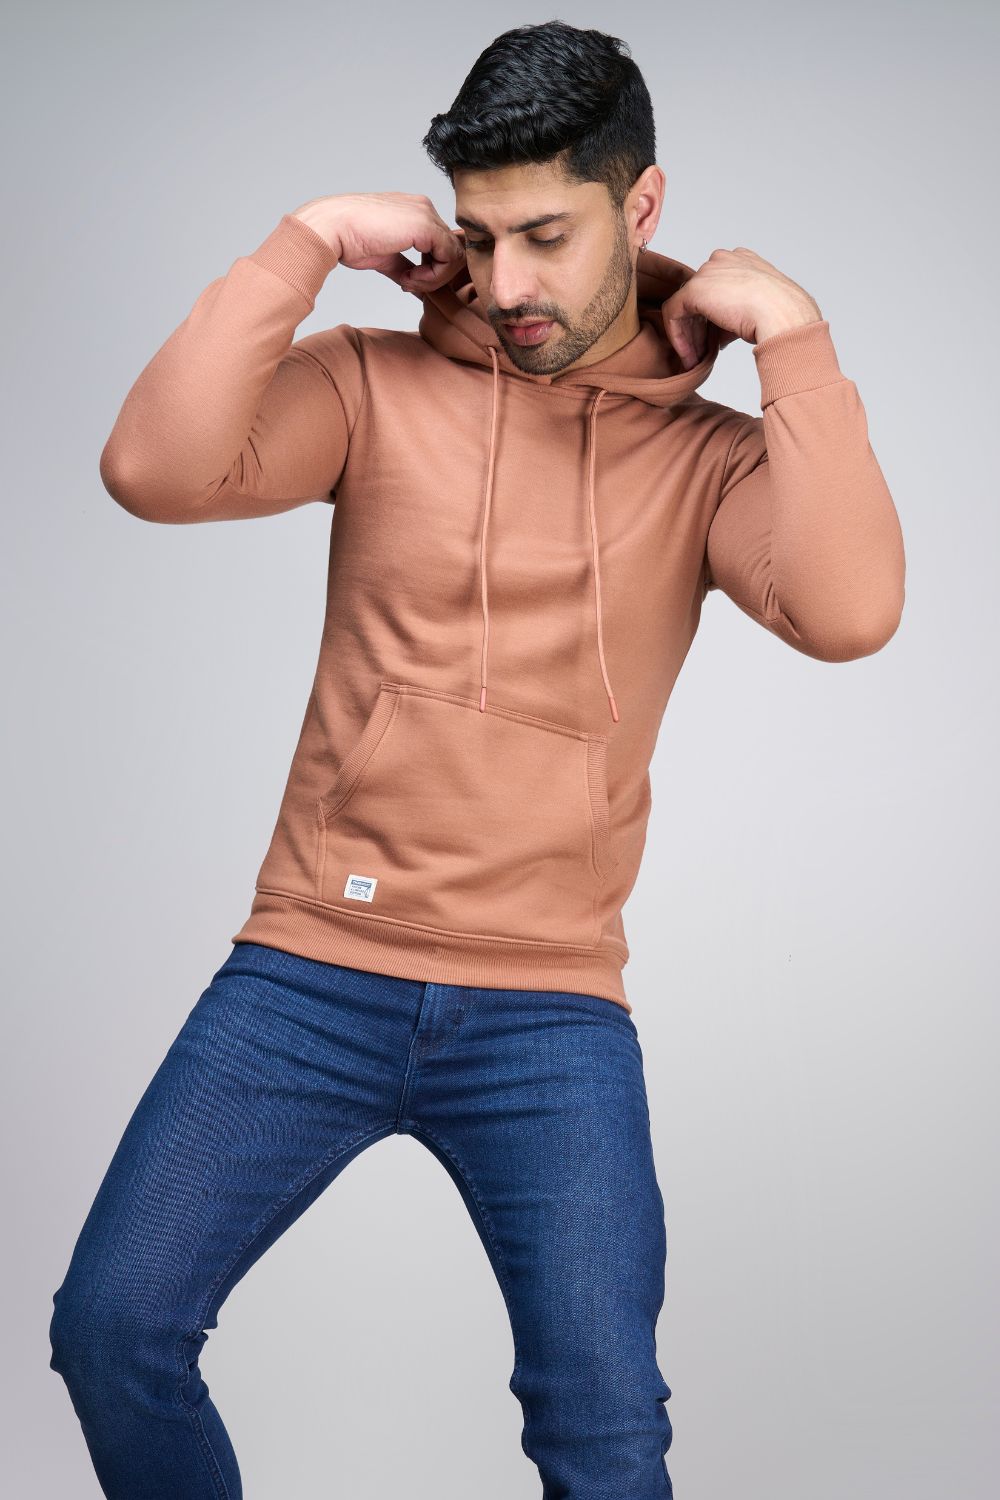 Leather Brown colored, hoodie for men with full sleeves and relaxed fit, closeup.